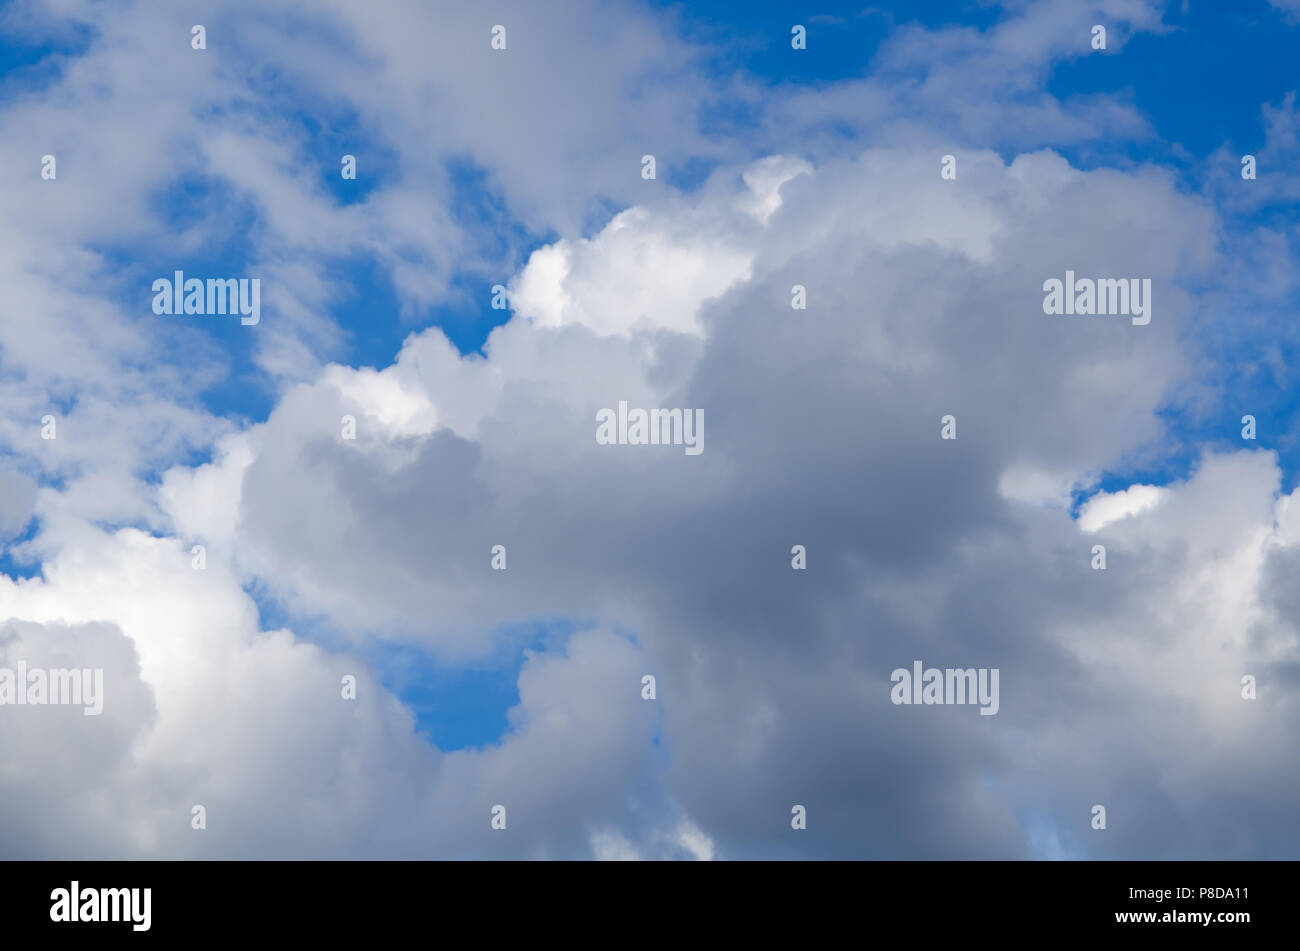 Blue sky with white abstract clouds Stock Photo